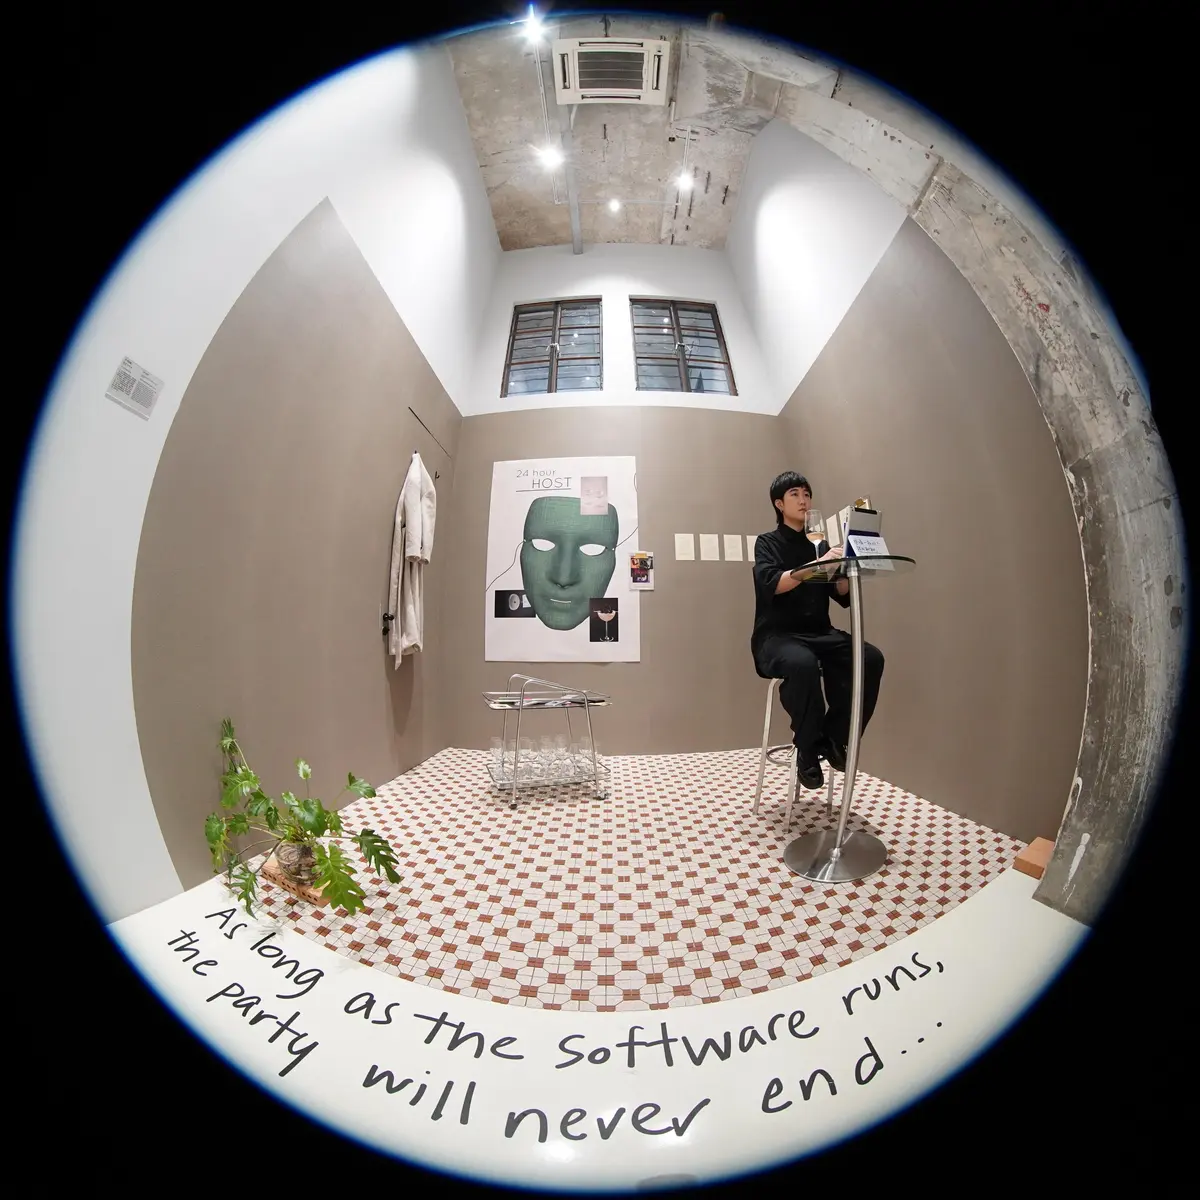 A person sitting at a high top table in a room captured through a fisheye lens. The room contains a poster of a green face mask, a hanging white coat, and a note on the floor that reads, "As long as the software runs the party will never end."